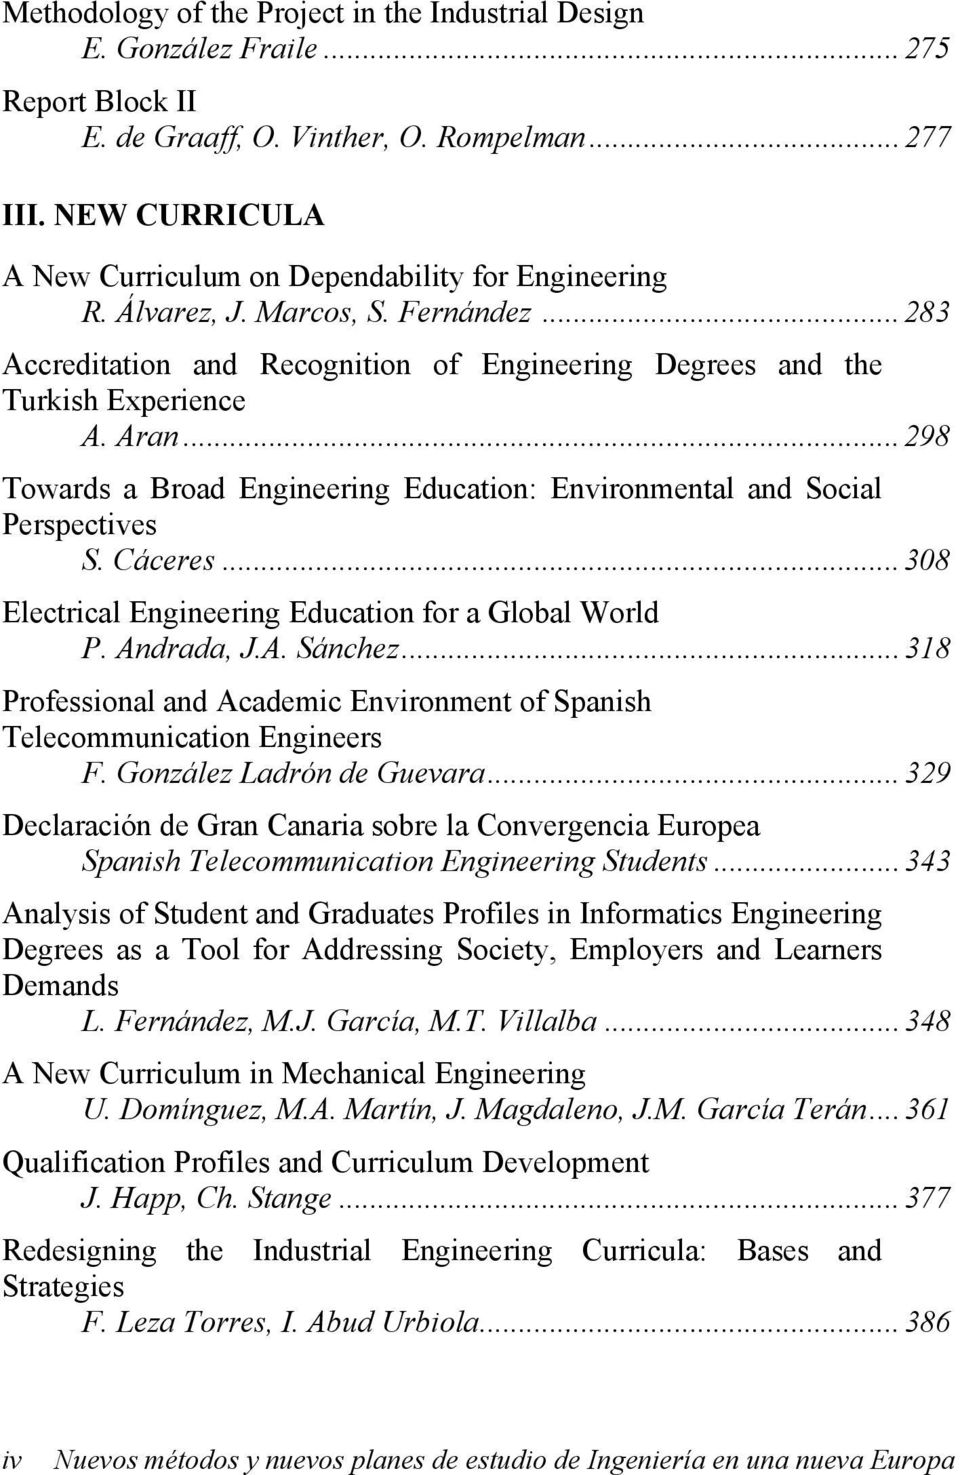 ..298 Towards a Broad Engineering Education: Environmental and Social Perspectives S. Cáceres...308 Electrical Engineering Education for a Global World P. Andrada, J.A. Sánchez.